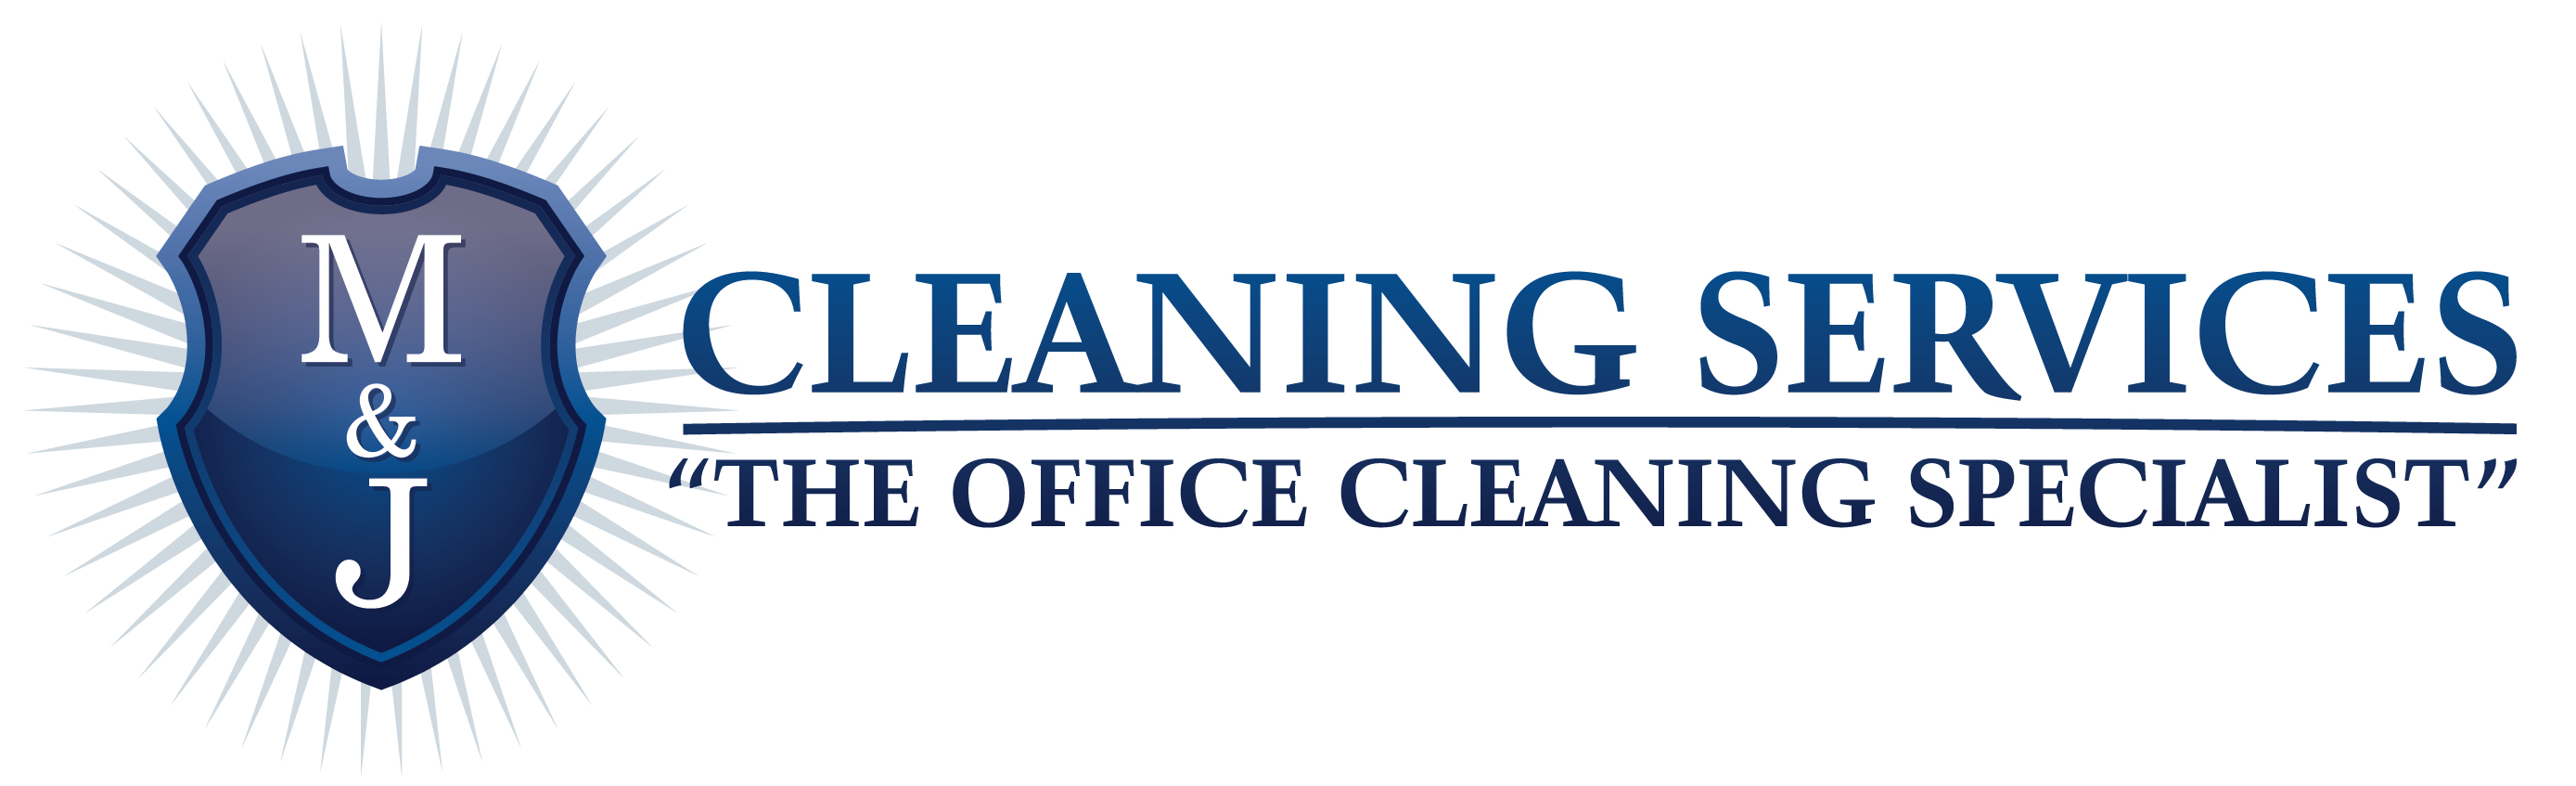 M&J Cleaning Services Logo